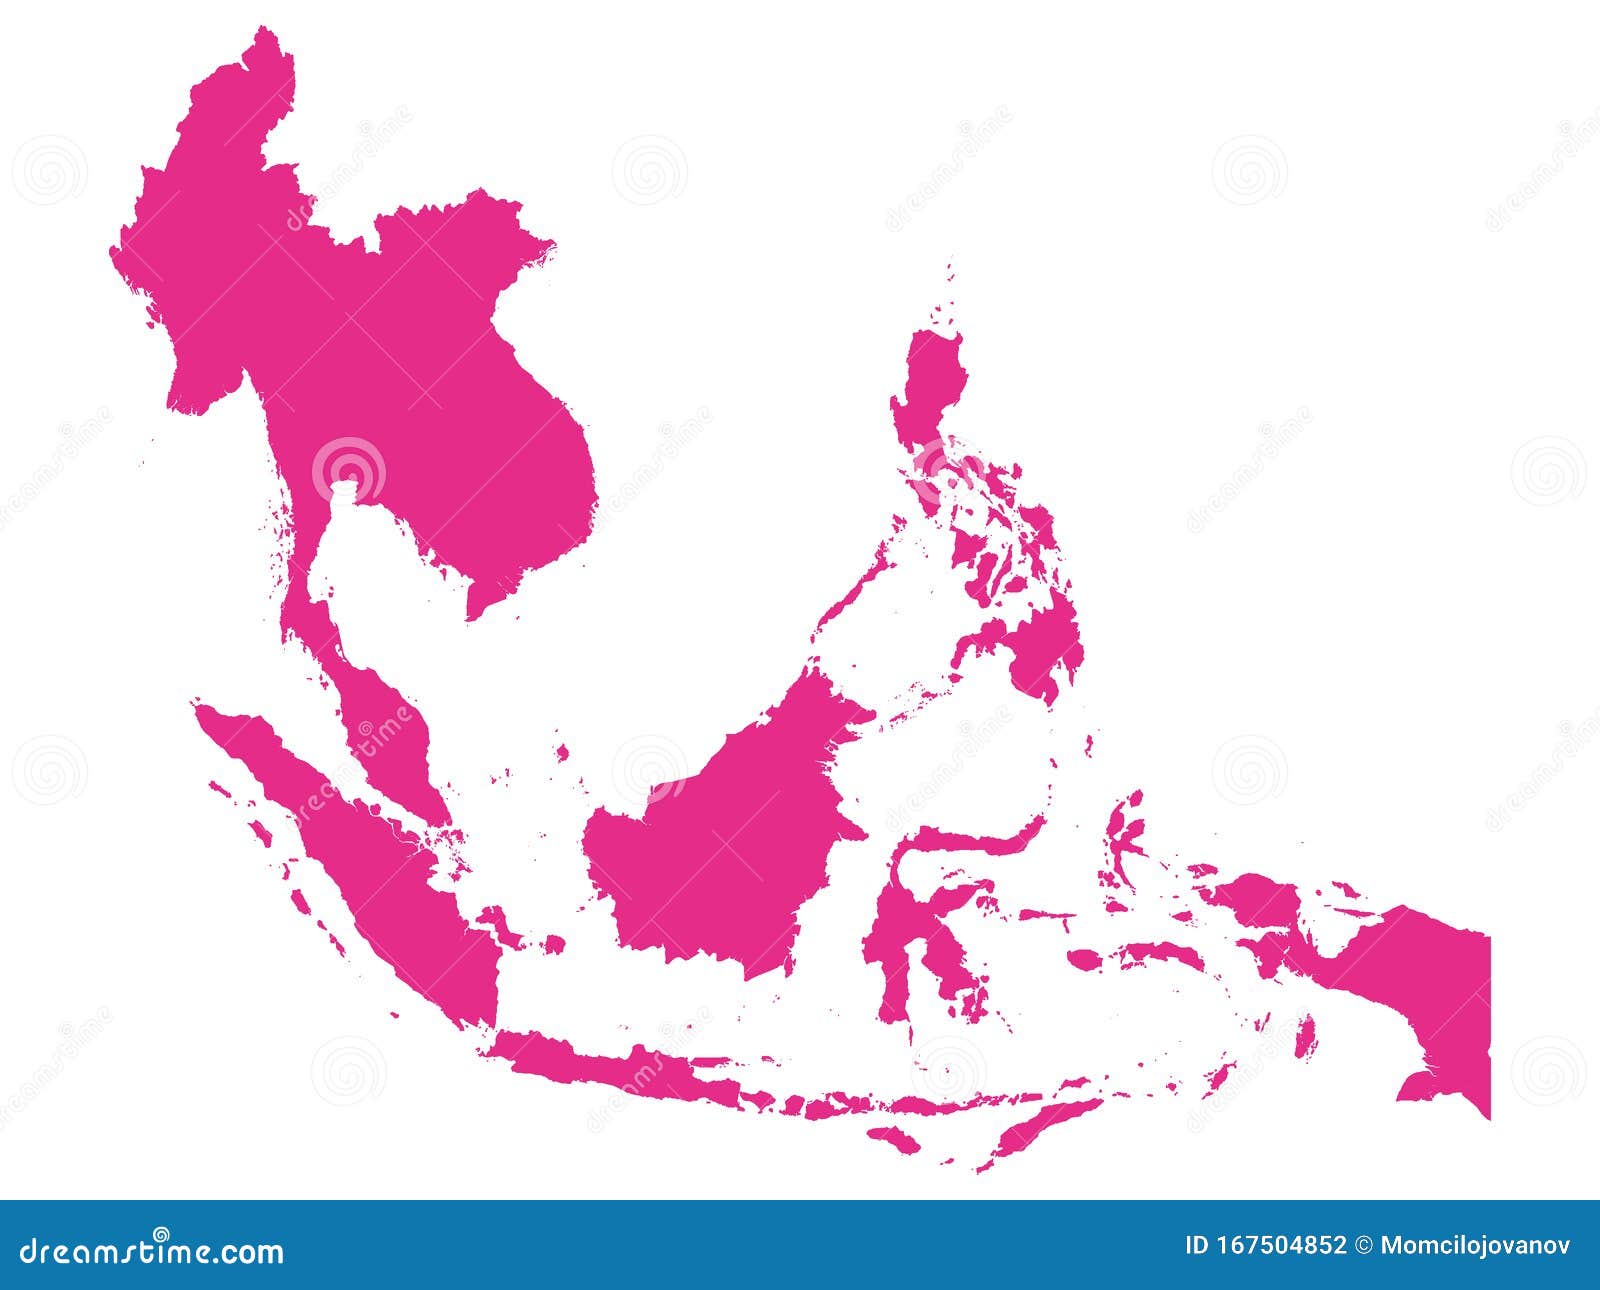 Pink Lady® territory in focus – Southeast Asia